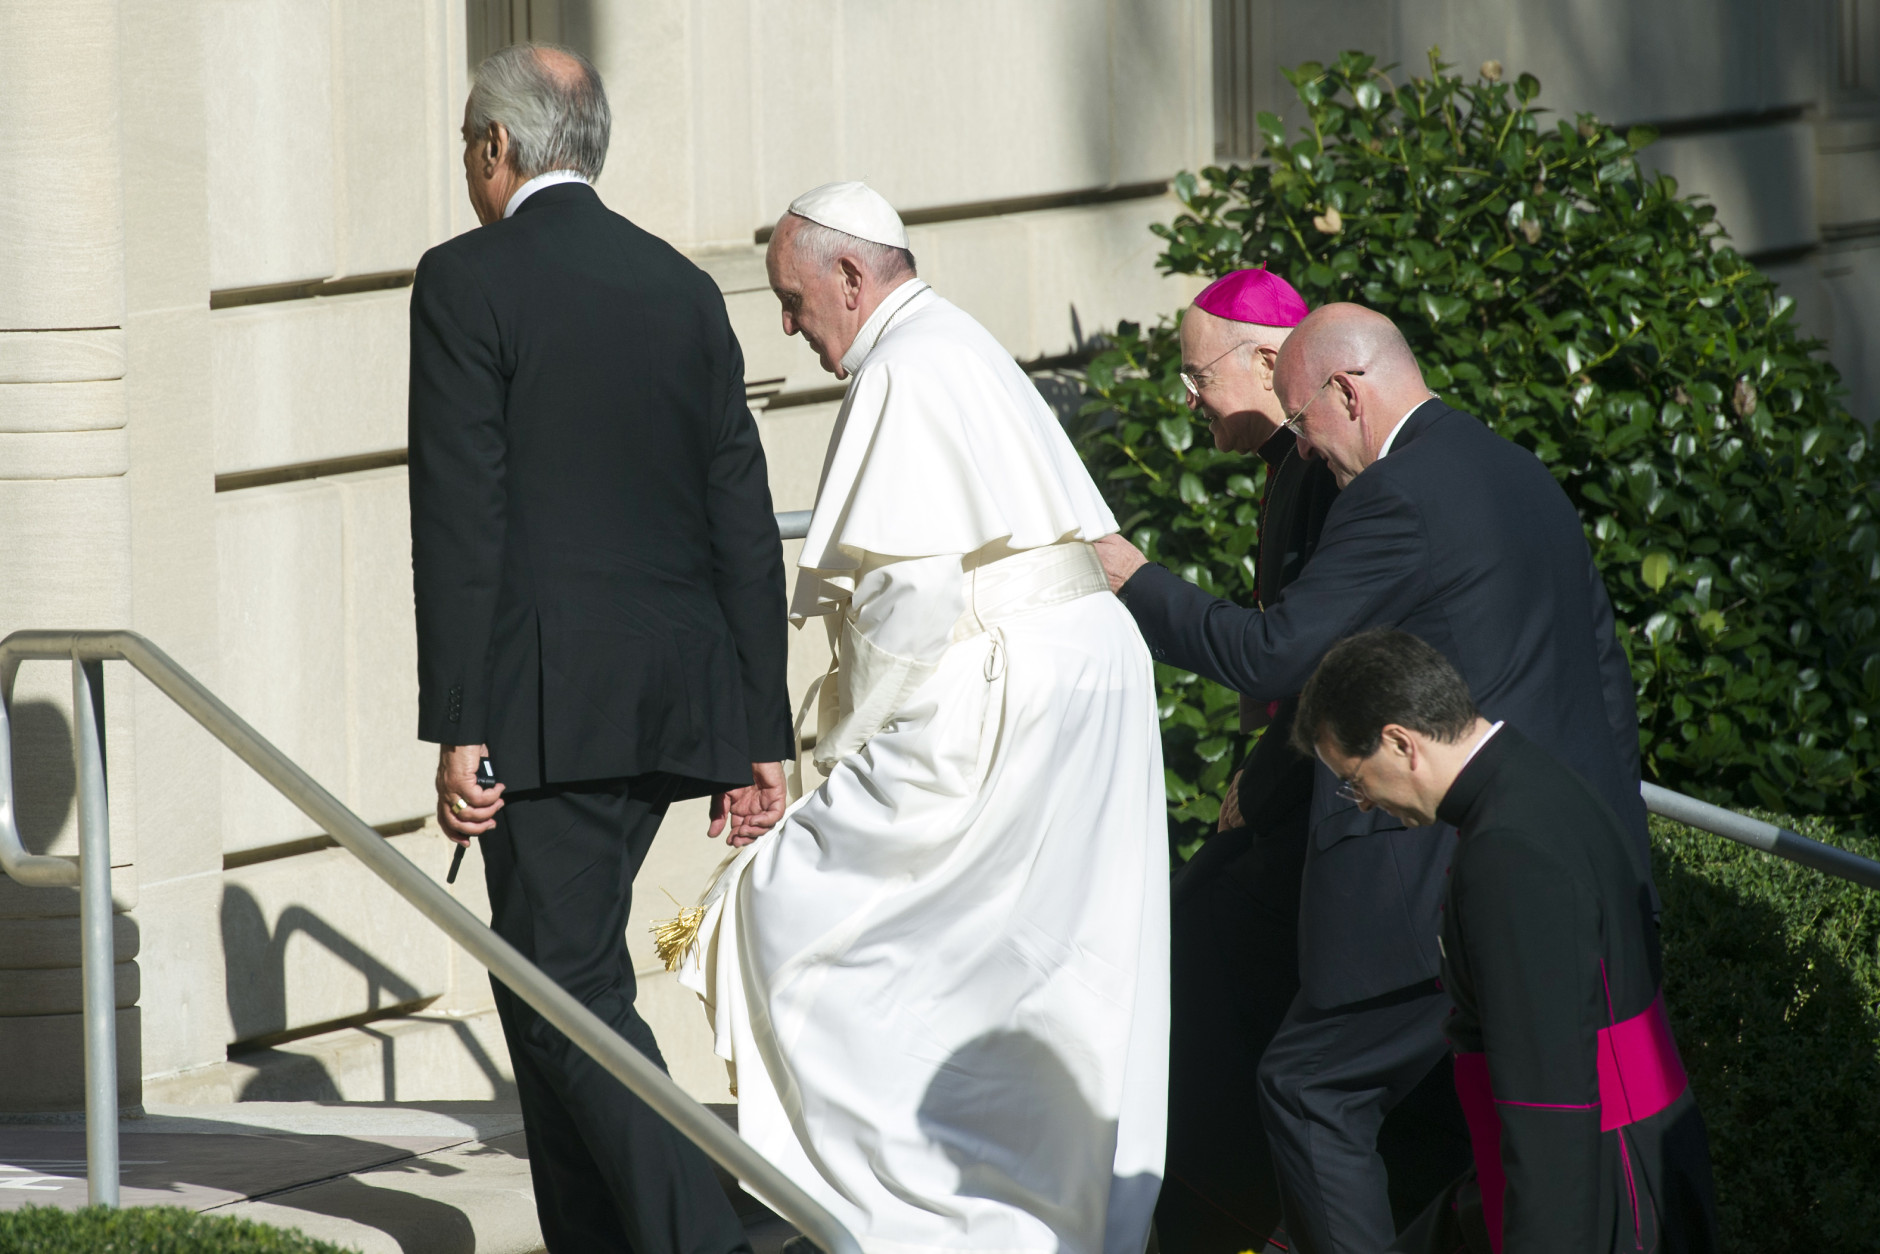 Pope Francis enters the Apostolic Nunciature, the Vatican's diplomatic mission in the heart of Washington, Tuesday, Sept. 22, 2015. Pope Francis will visit the White House on Wednesday, becoming only the third pope to visit the White House.  (AP Photo/Cliff Owen)